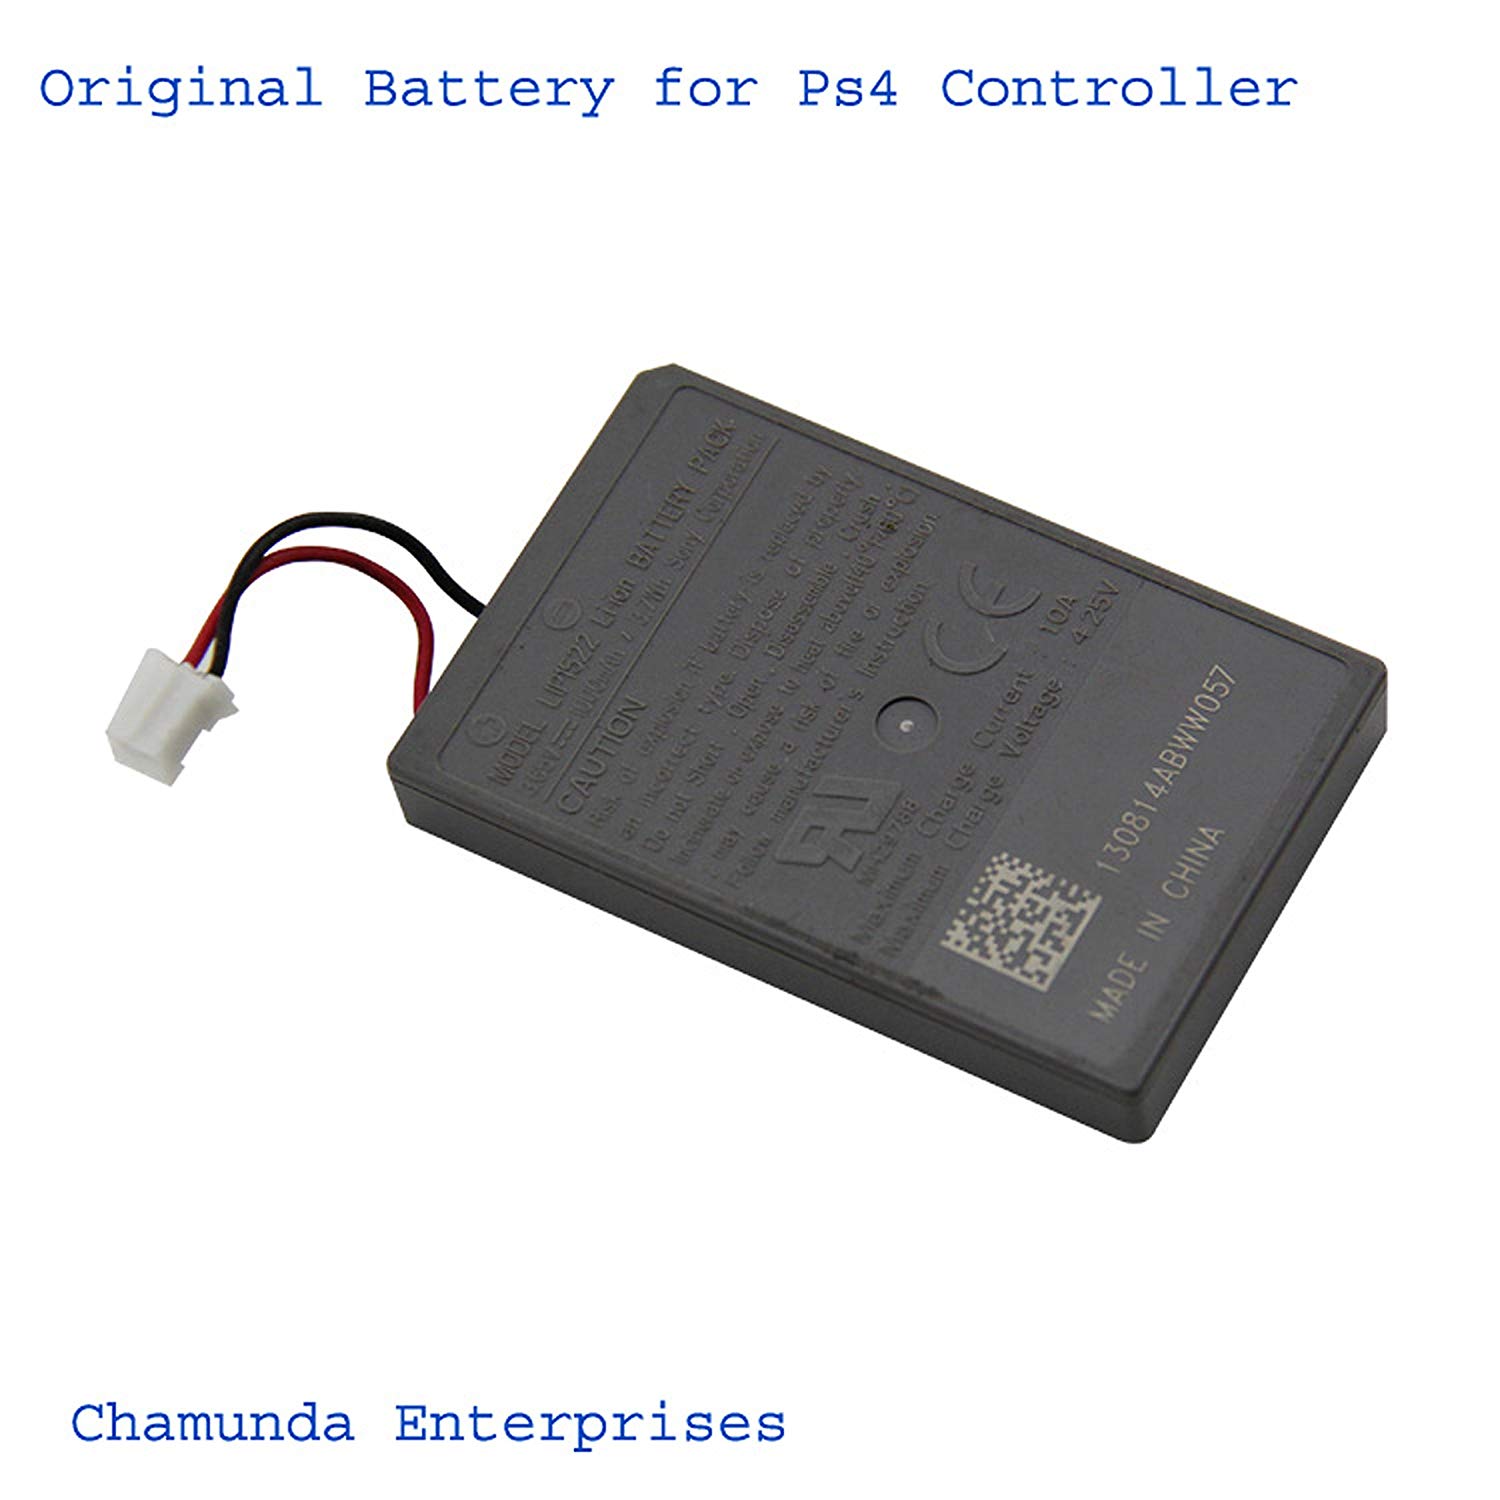 PS4 PlayStation 4 Wireless Controller Replacement Battery ORIGINAL PS4 Battery for Version1 V2 comes in loose Packing